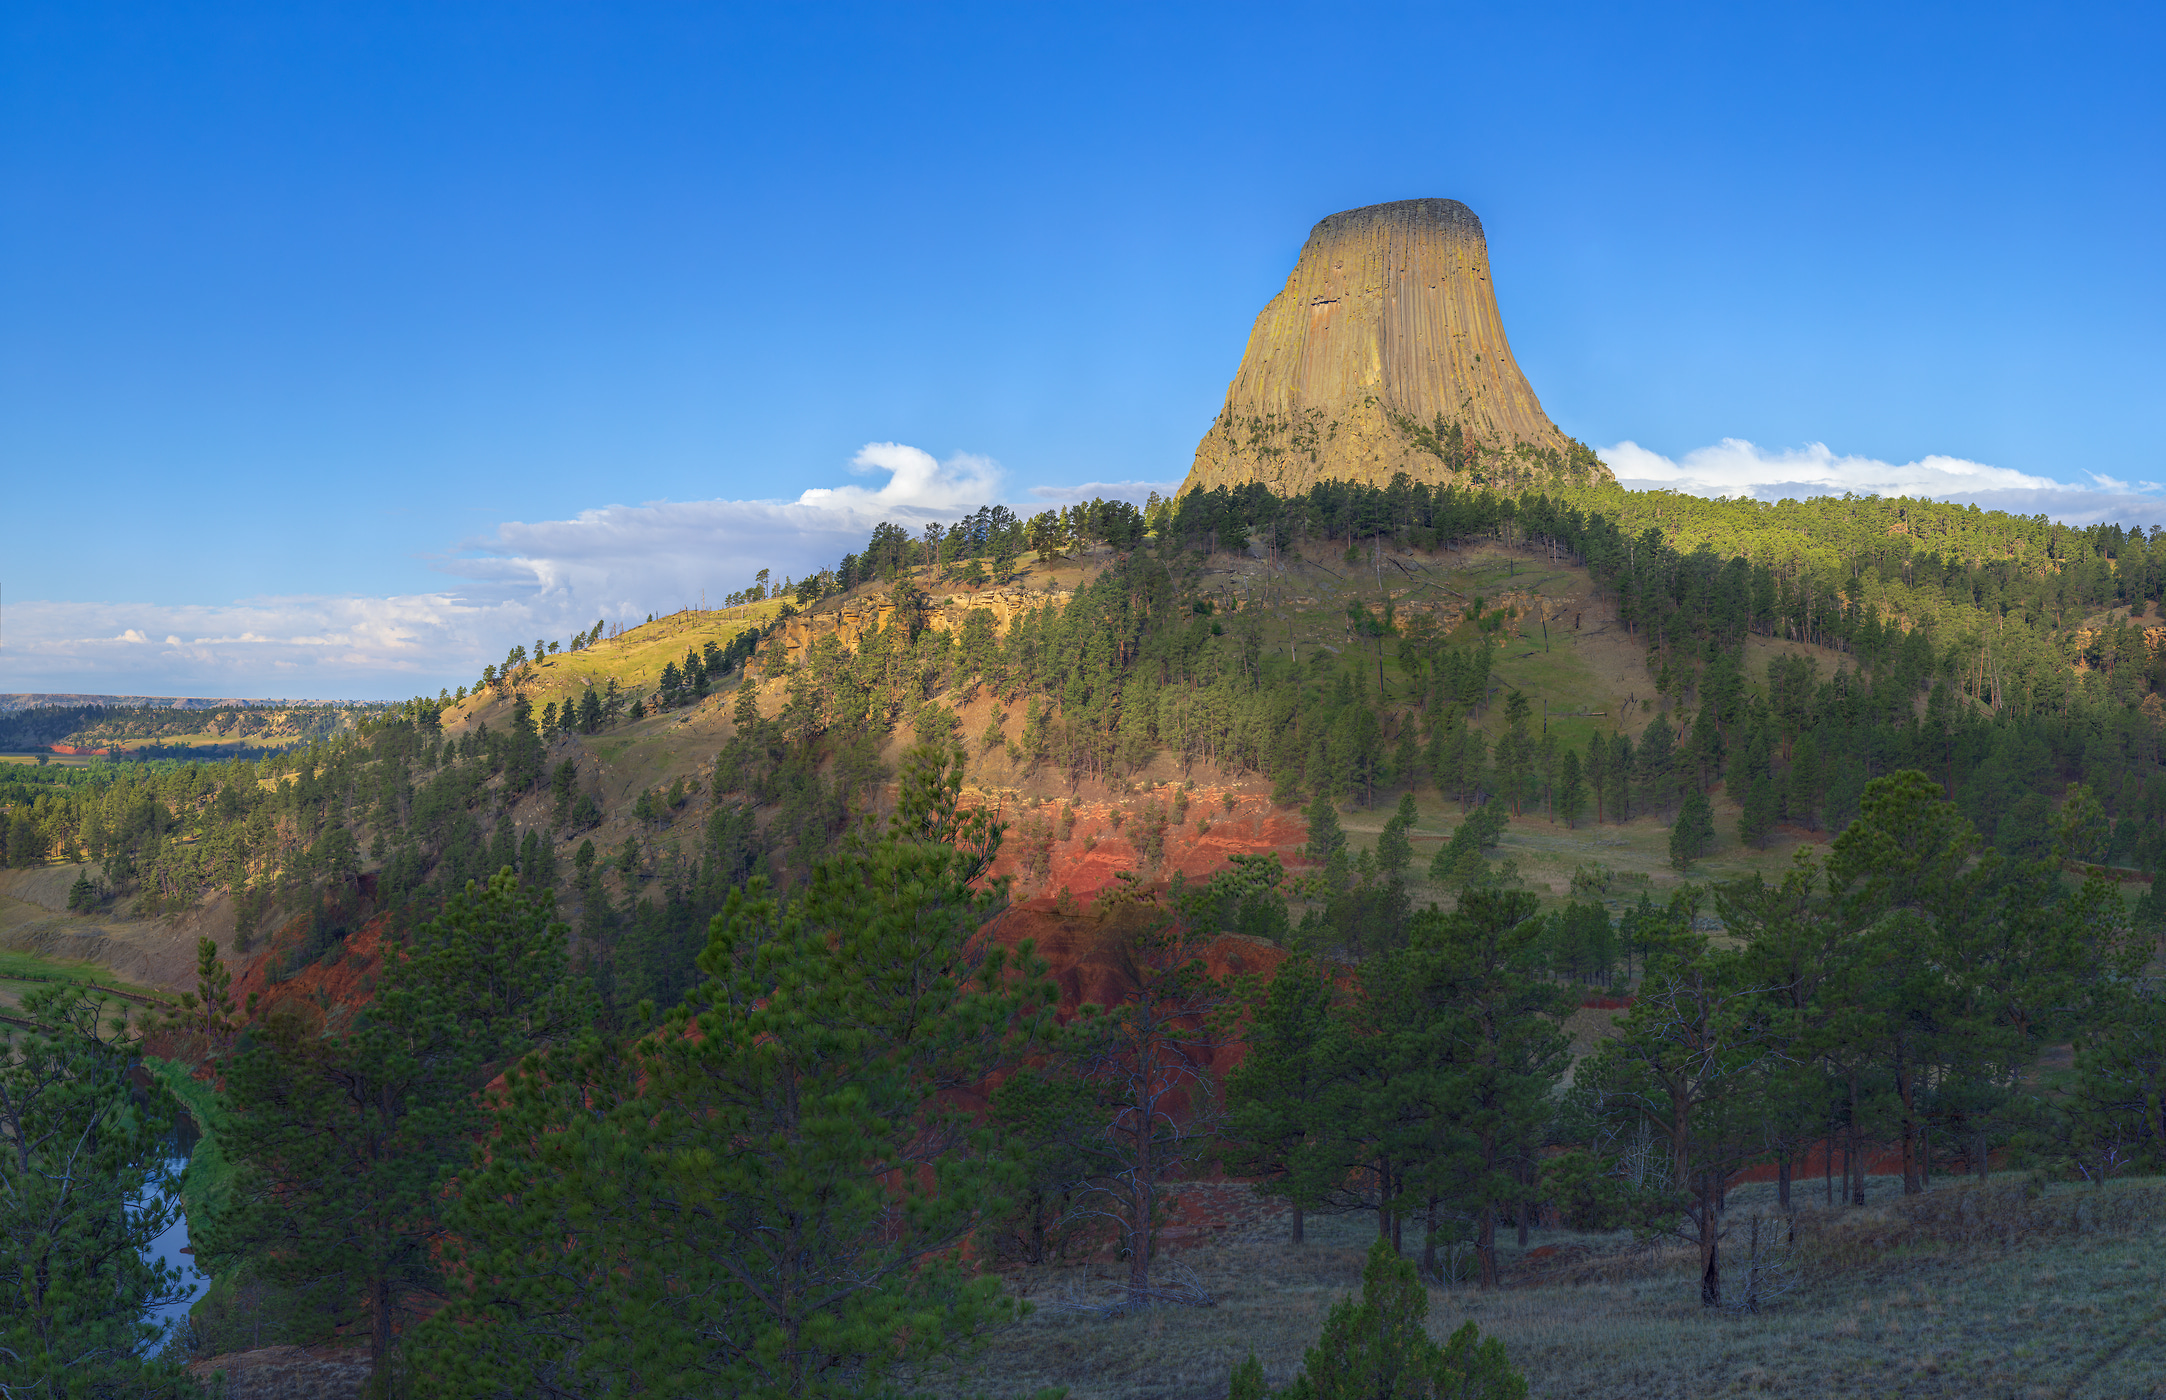 821 megapixels! A very high resolution, large-format VAST photo print of a Wyoming landscape including Devils Tower; photograph created by John Freeman in Devils Tower National Monument, Wyoming.